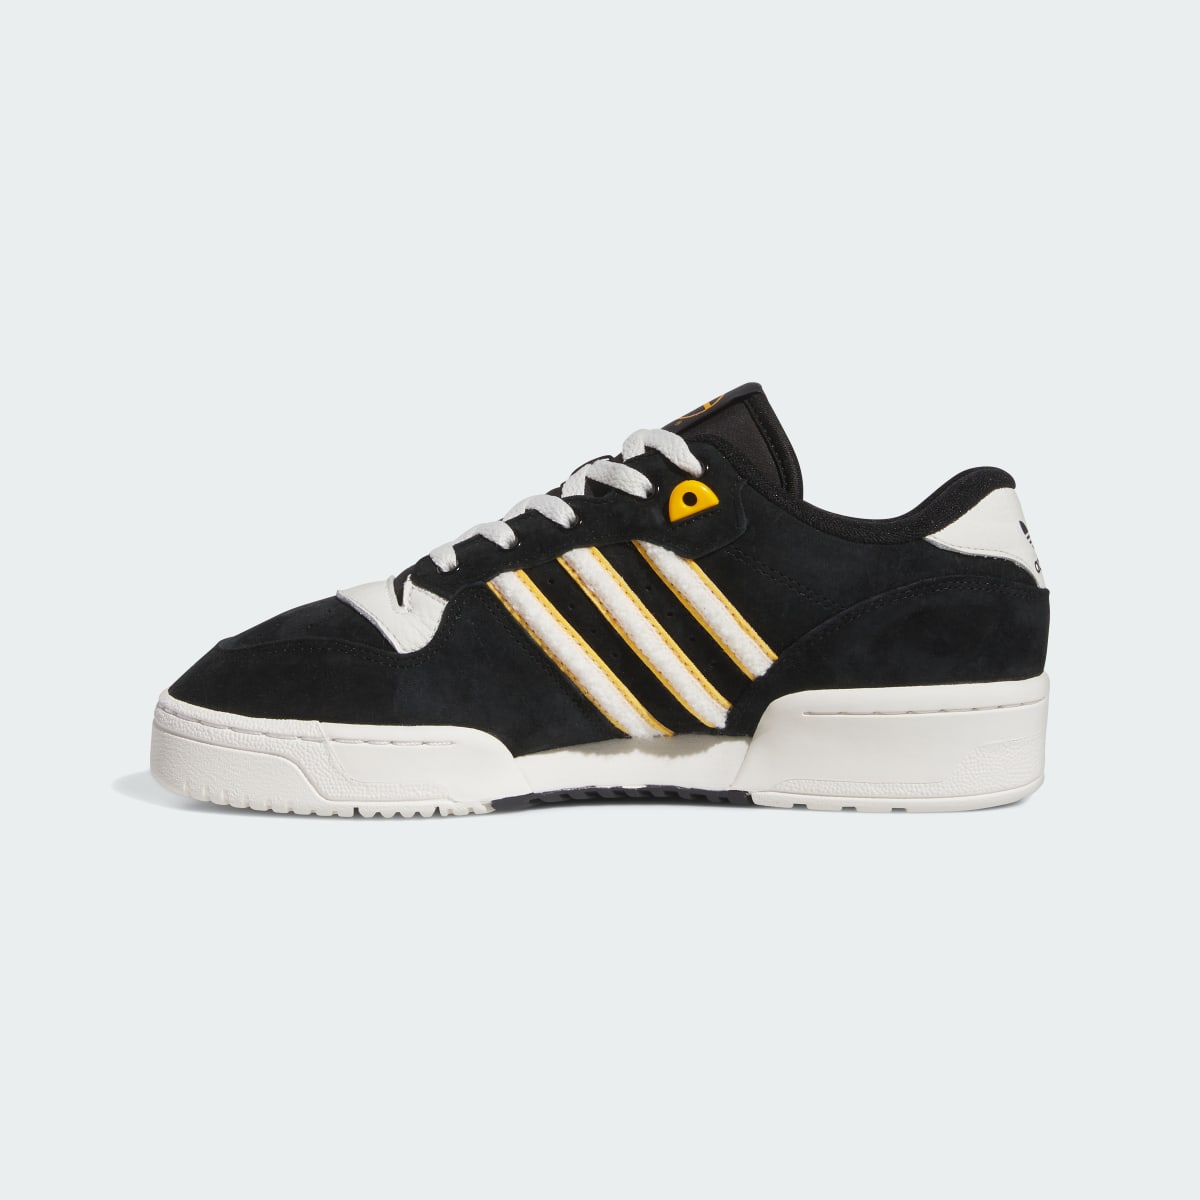 Adidas Grambling State Rivalry Low Shoes. 7